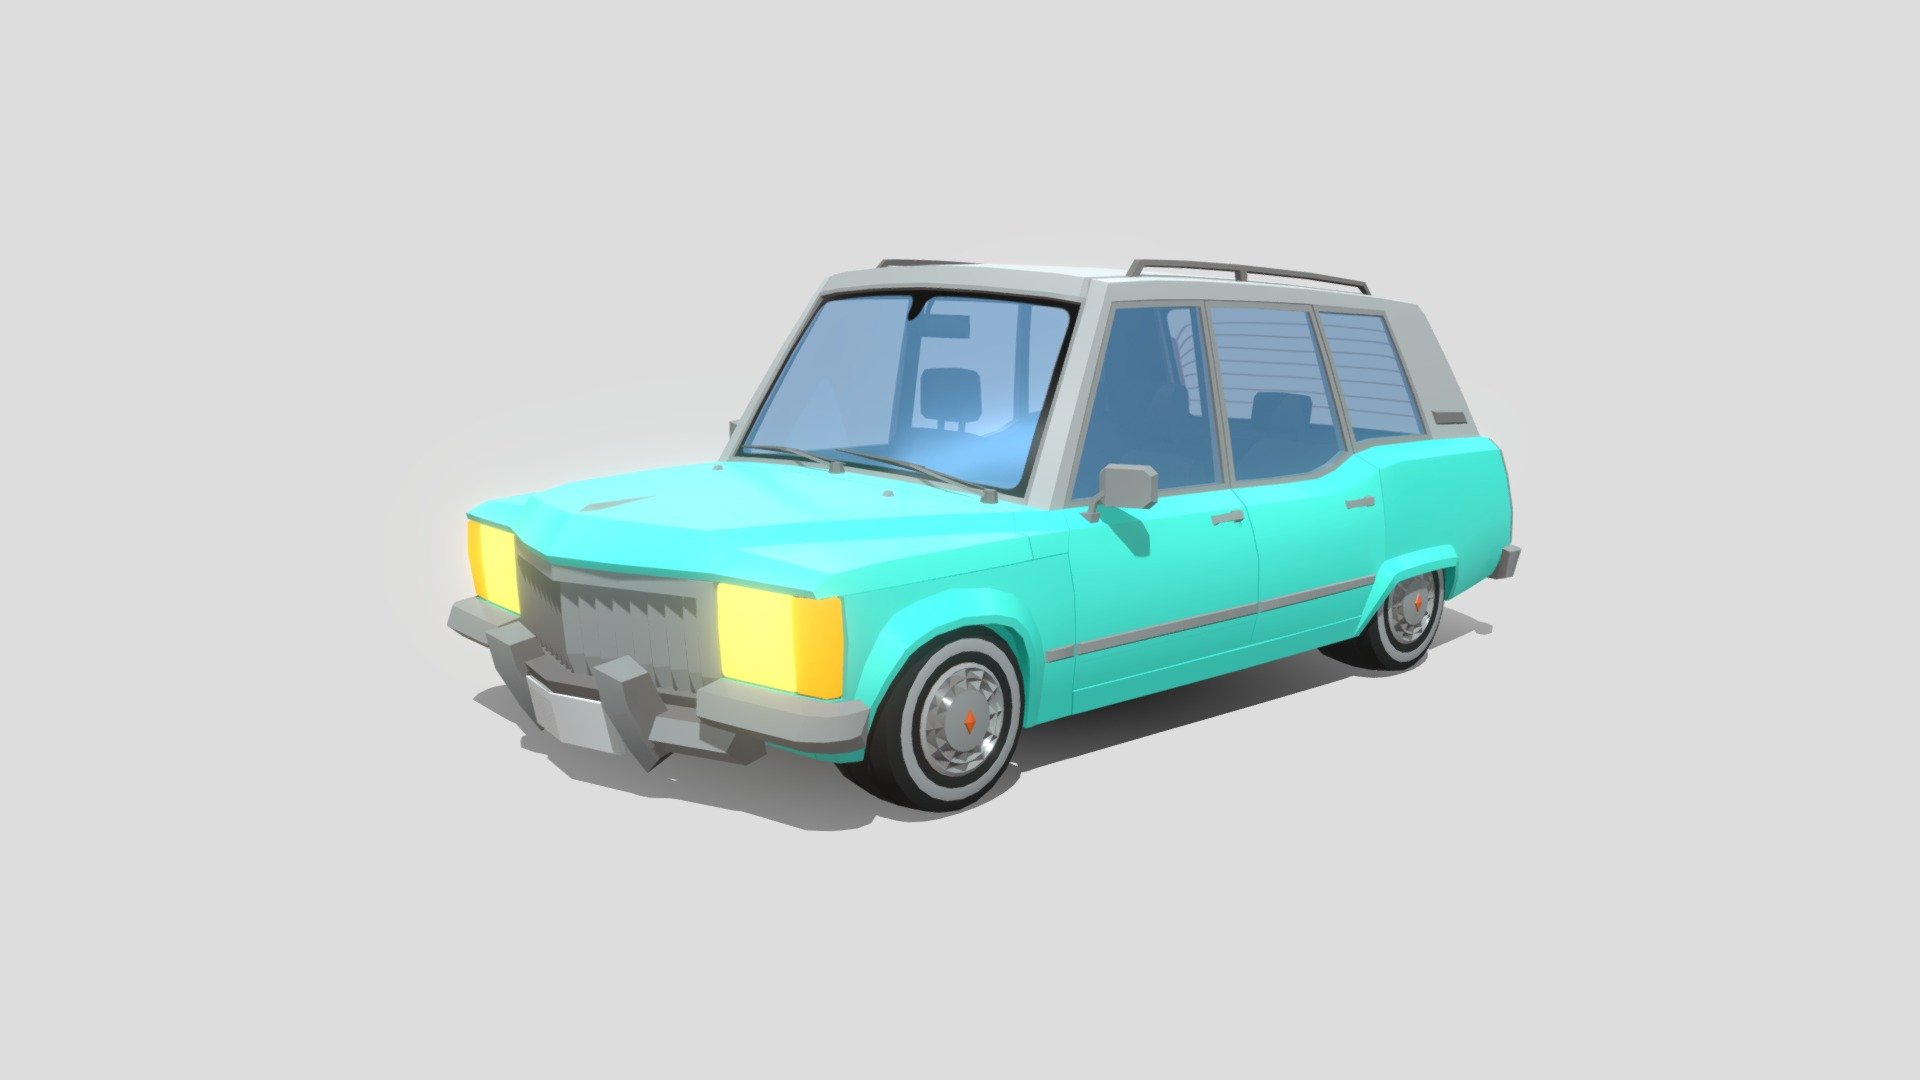 Car for your game or animation. You can disassemble it or blow it up in peaces. Have fun with it!
This model is part of still growing collection:
https://skfb.ly/ozpn9 - Low poly Wagon - Buy Royalty Free 3D model by arturs.vitas 3d model